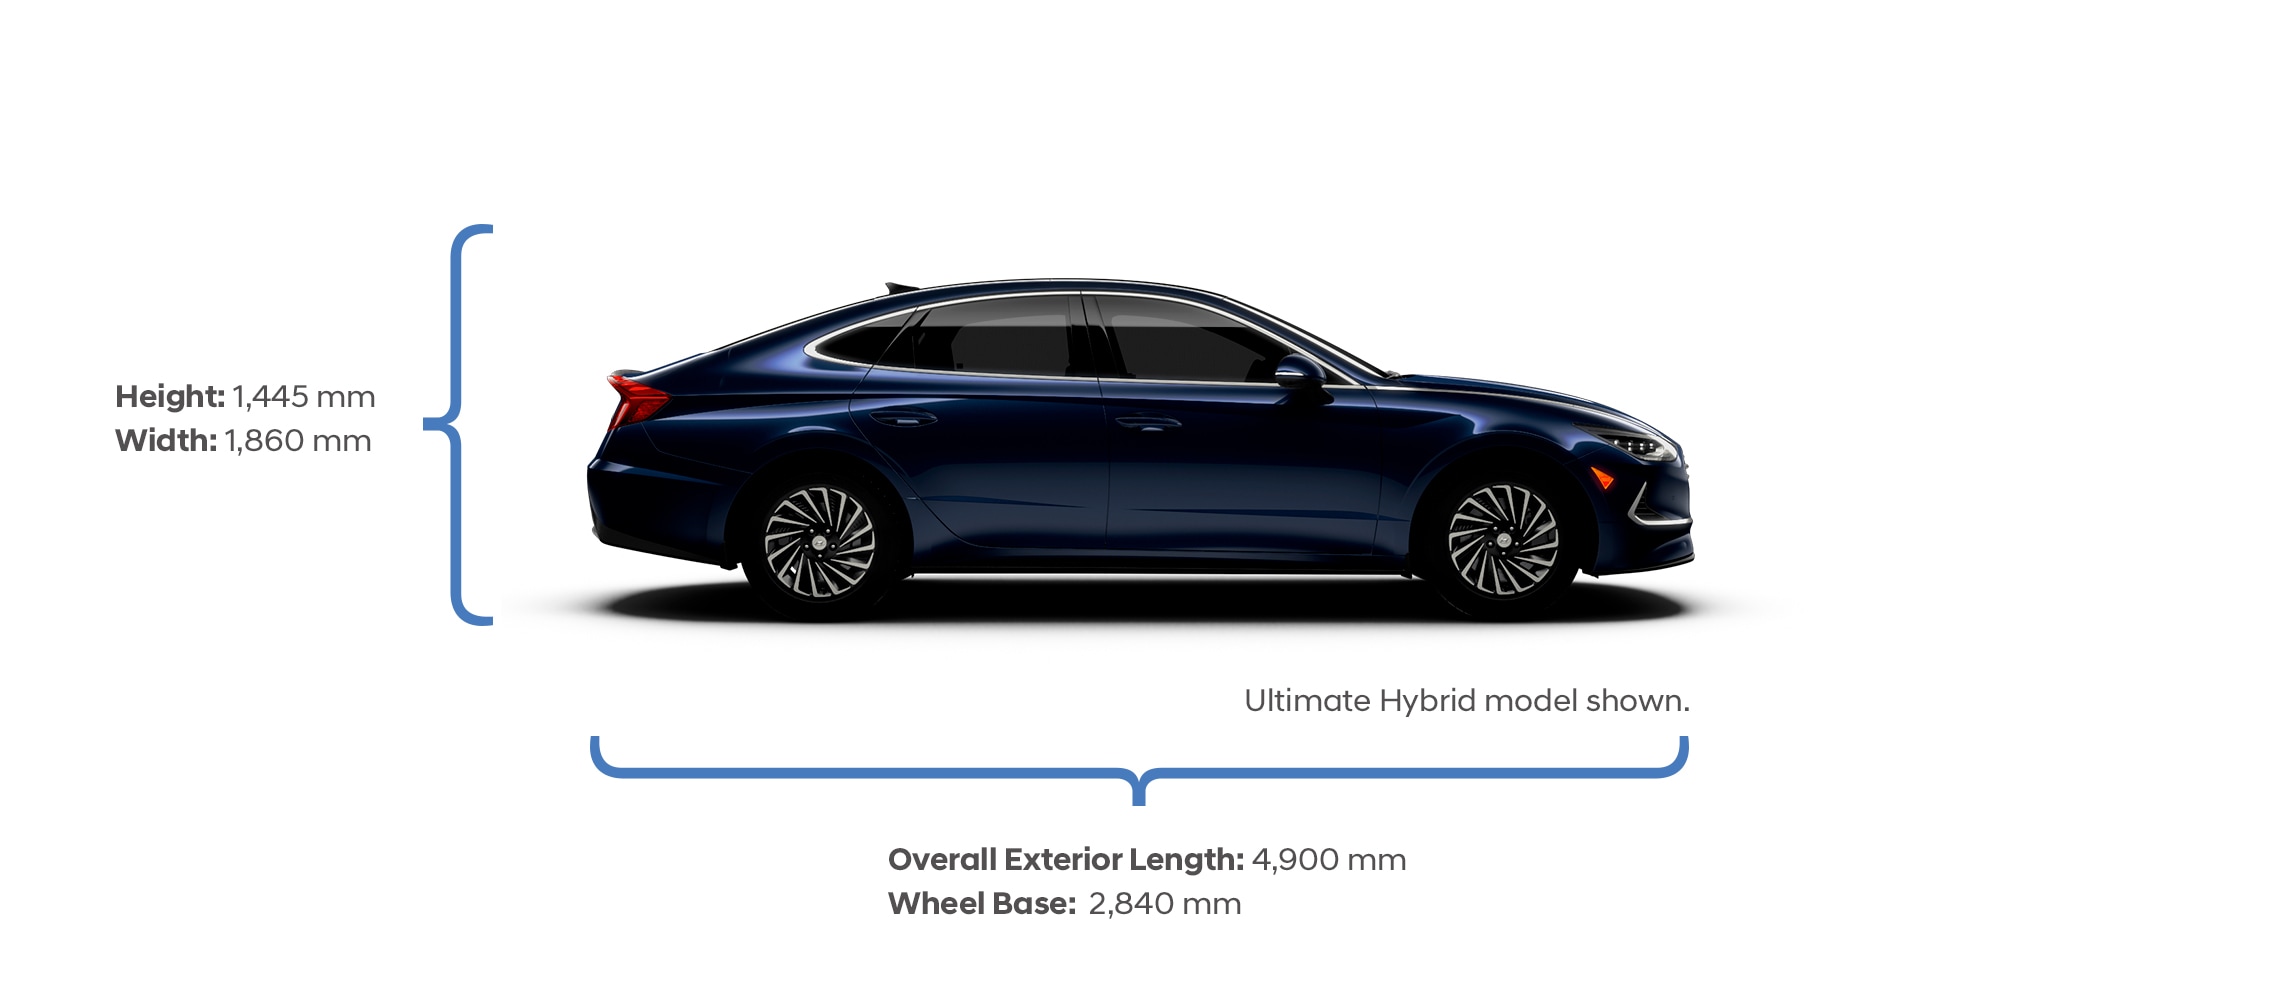 Height and width specifications of the 2022 SONATA